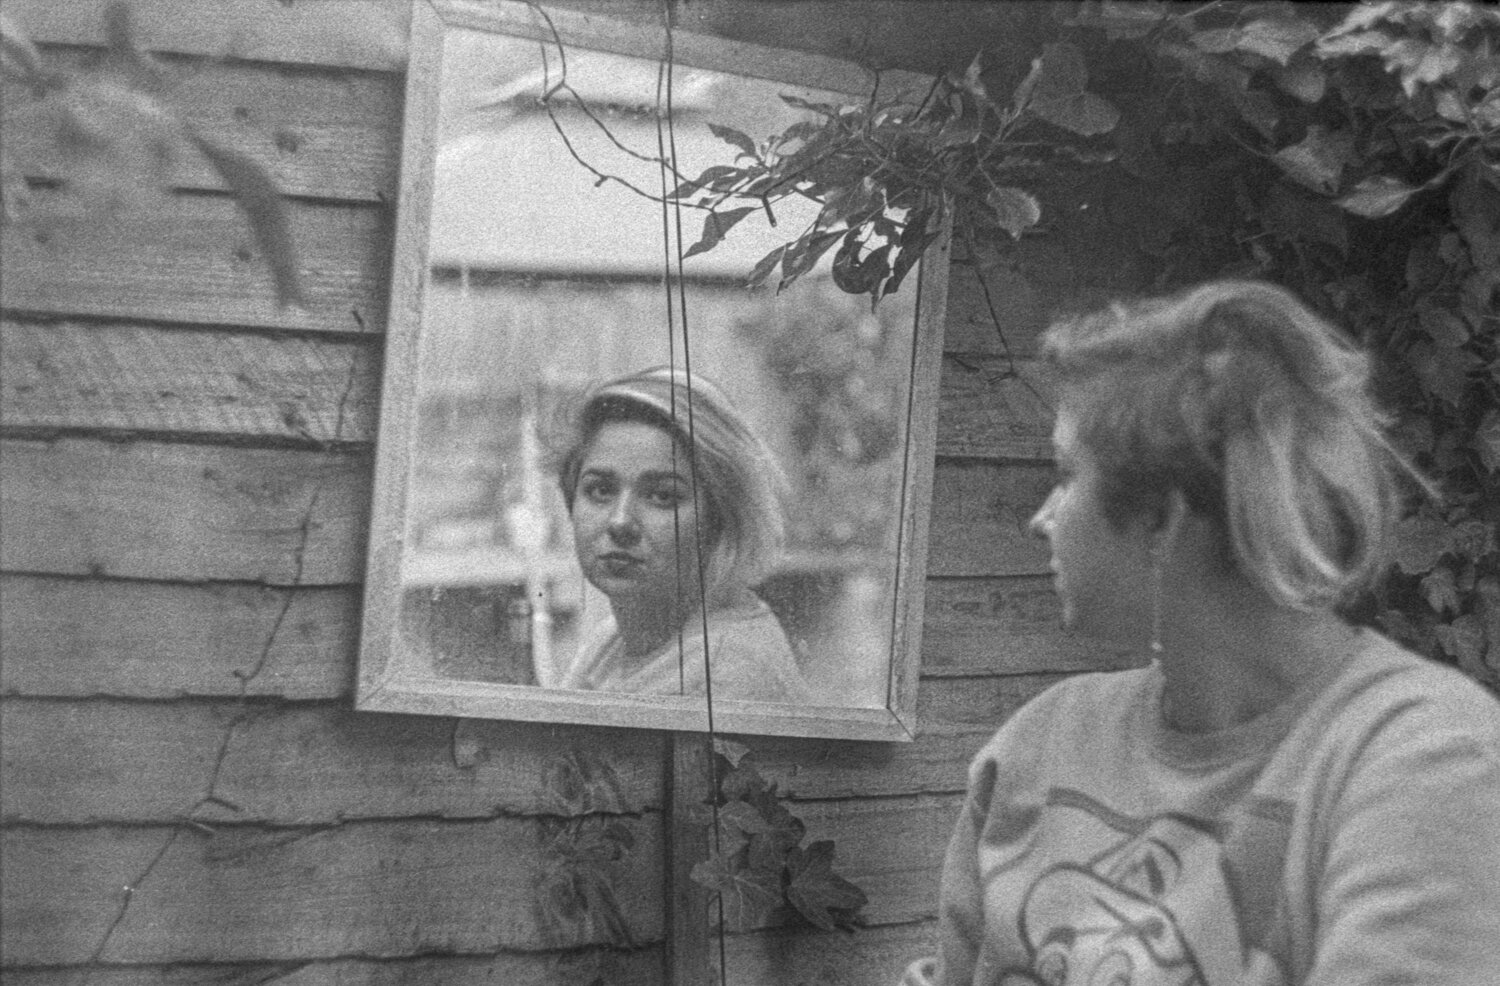 A woman looks at a mirror over her shoulder.